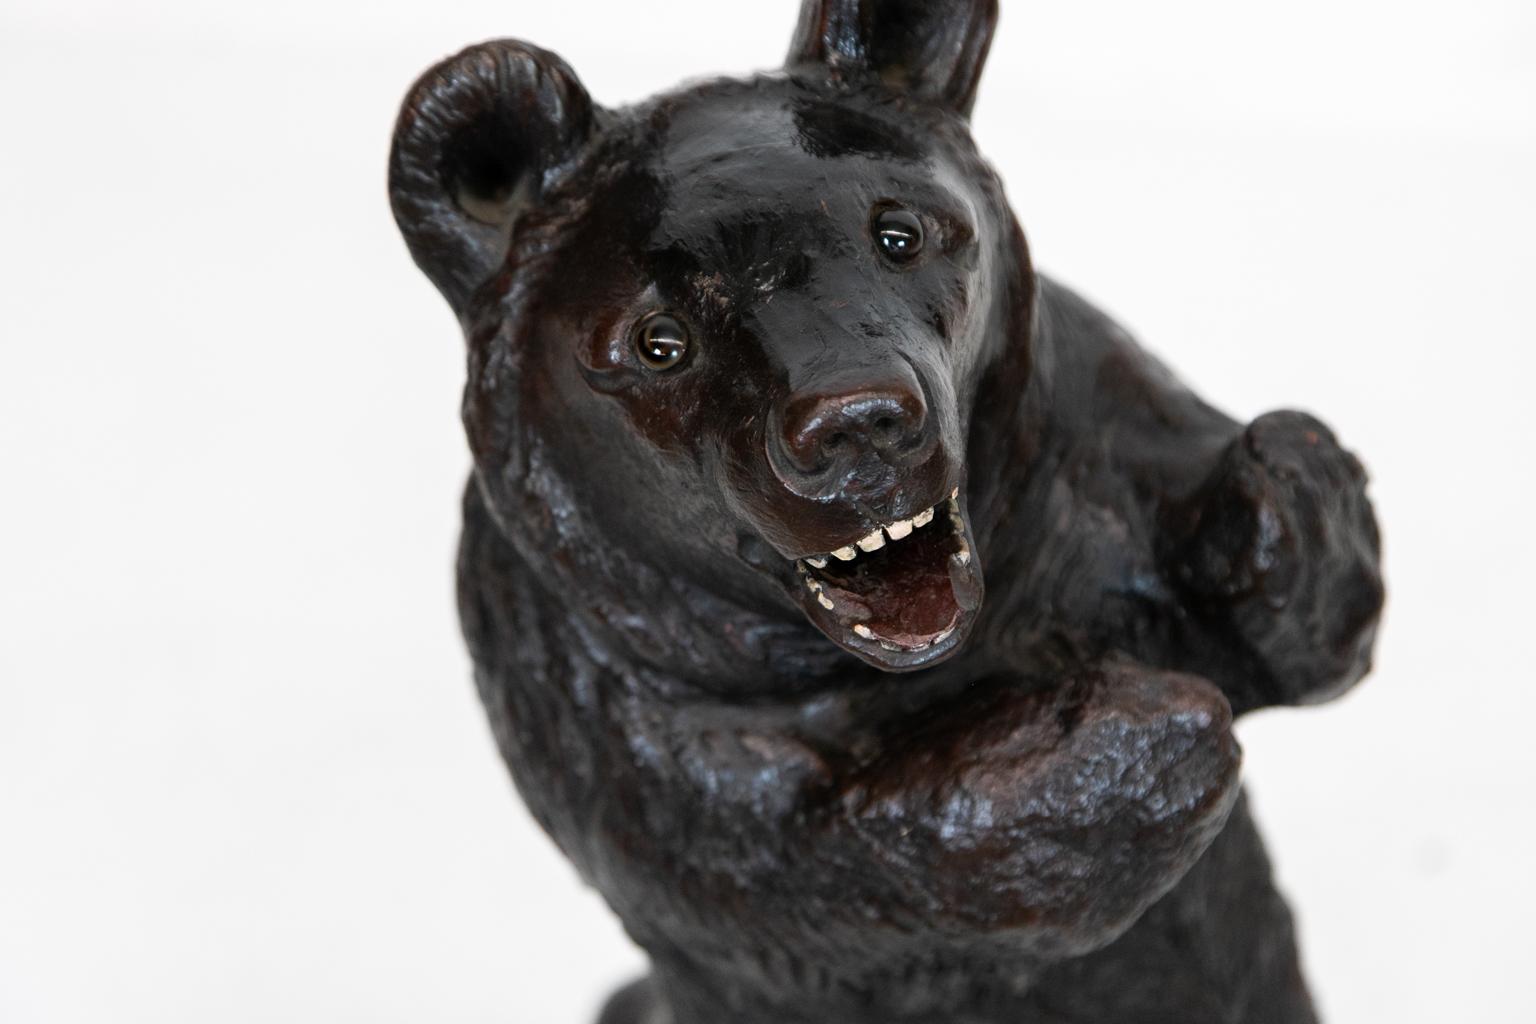 Terracotta Black Forest bear, retaining its original glass eyes. The figure is removable from the 5 .5 inch base.